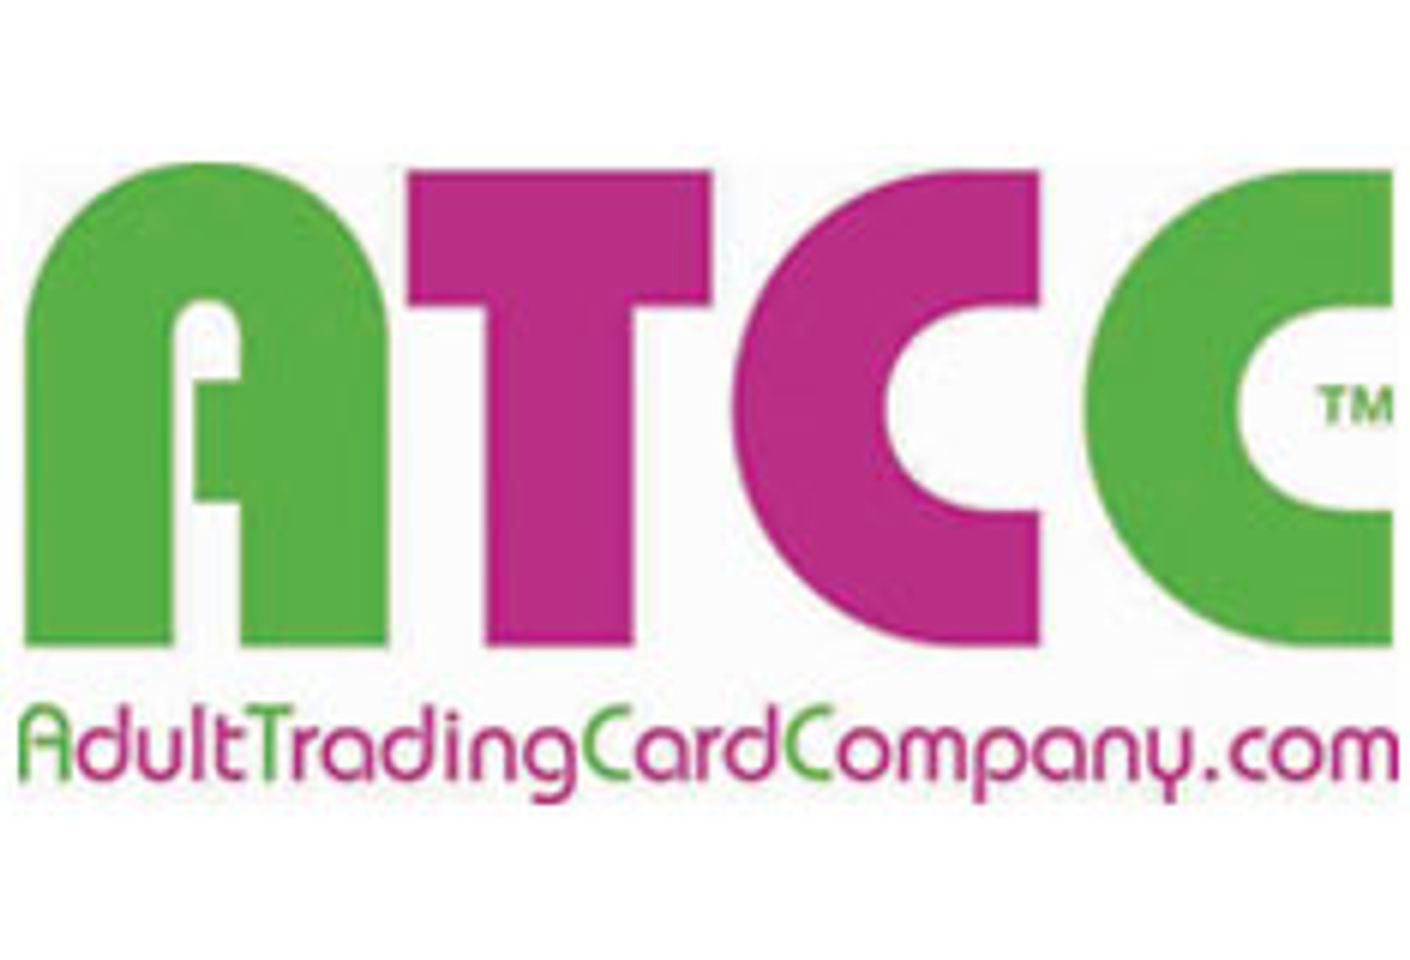 Adult Trading Card Company to Debut Retail Packs at Exxxotica L.A.